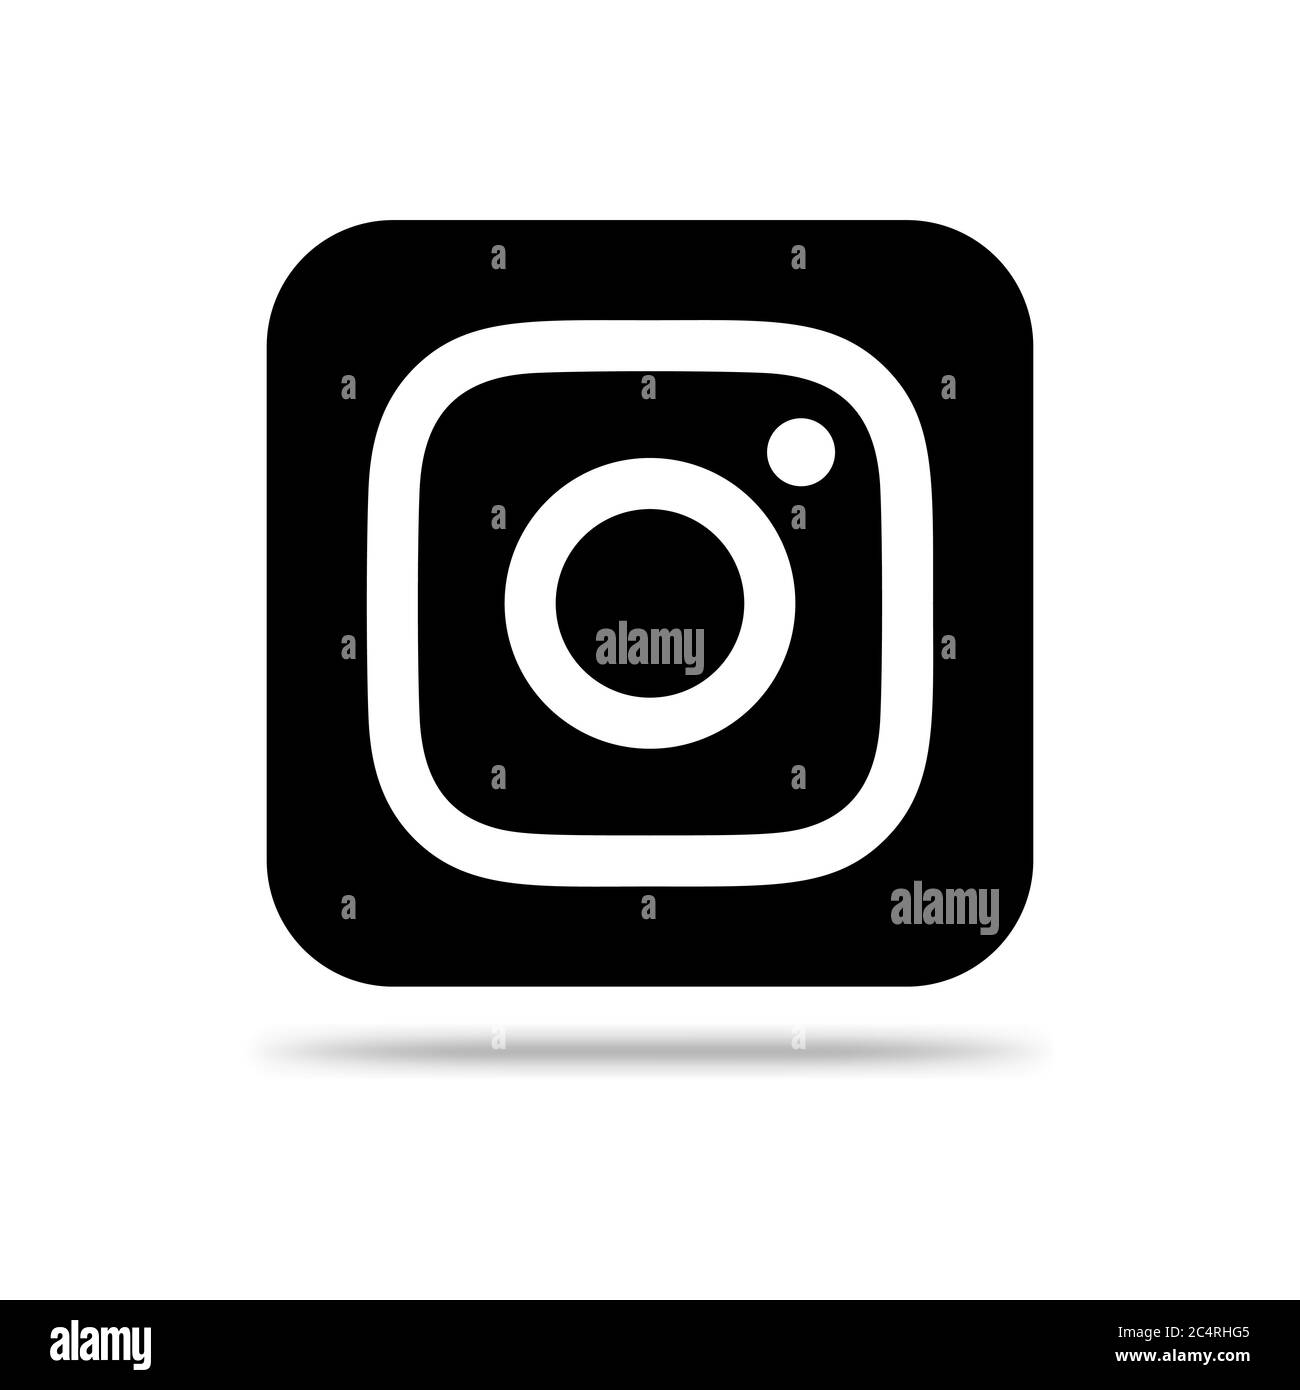 VORONEZH, RUSSIA - JANUARY 31, 2020: Instagram logo black square icon with shadow Stock Vector